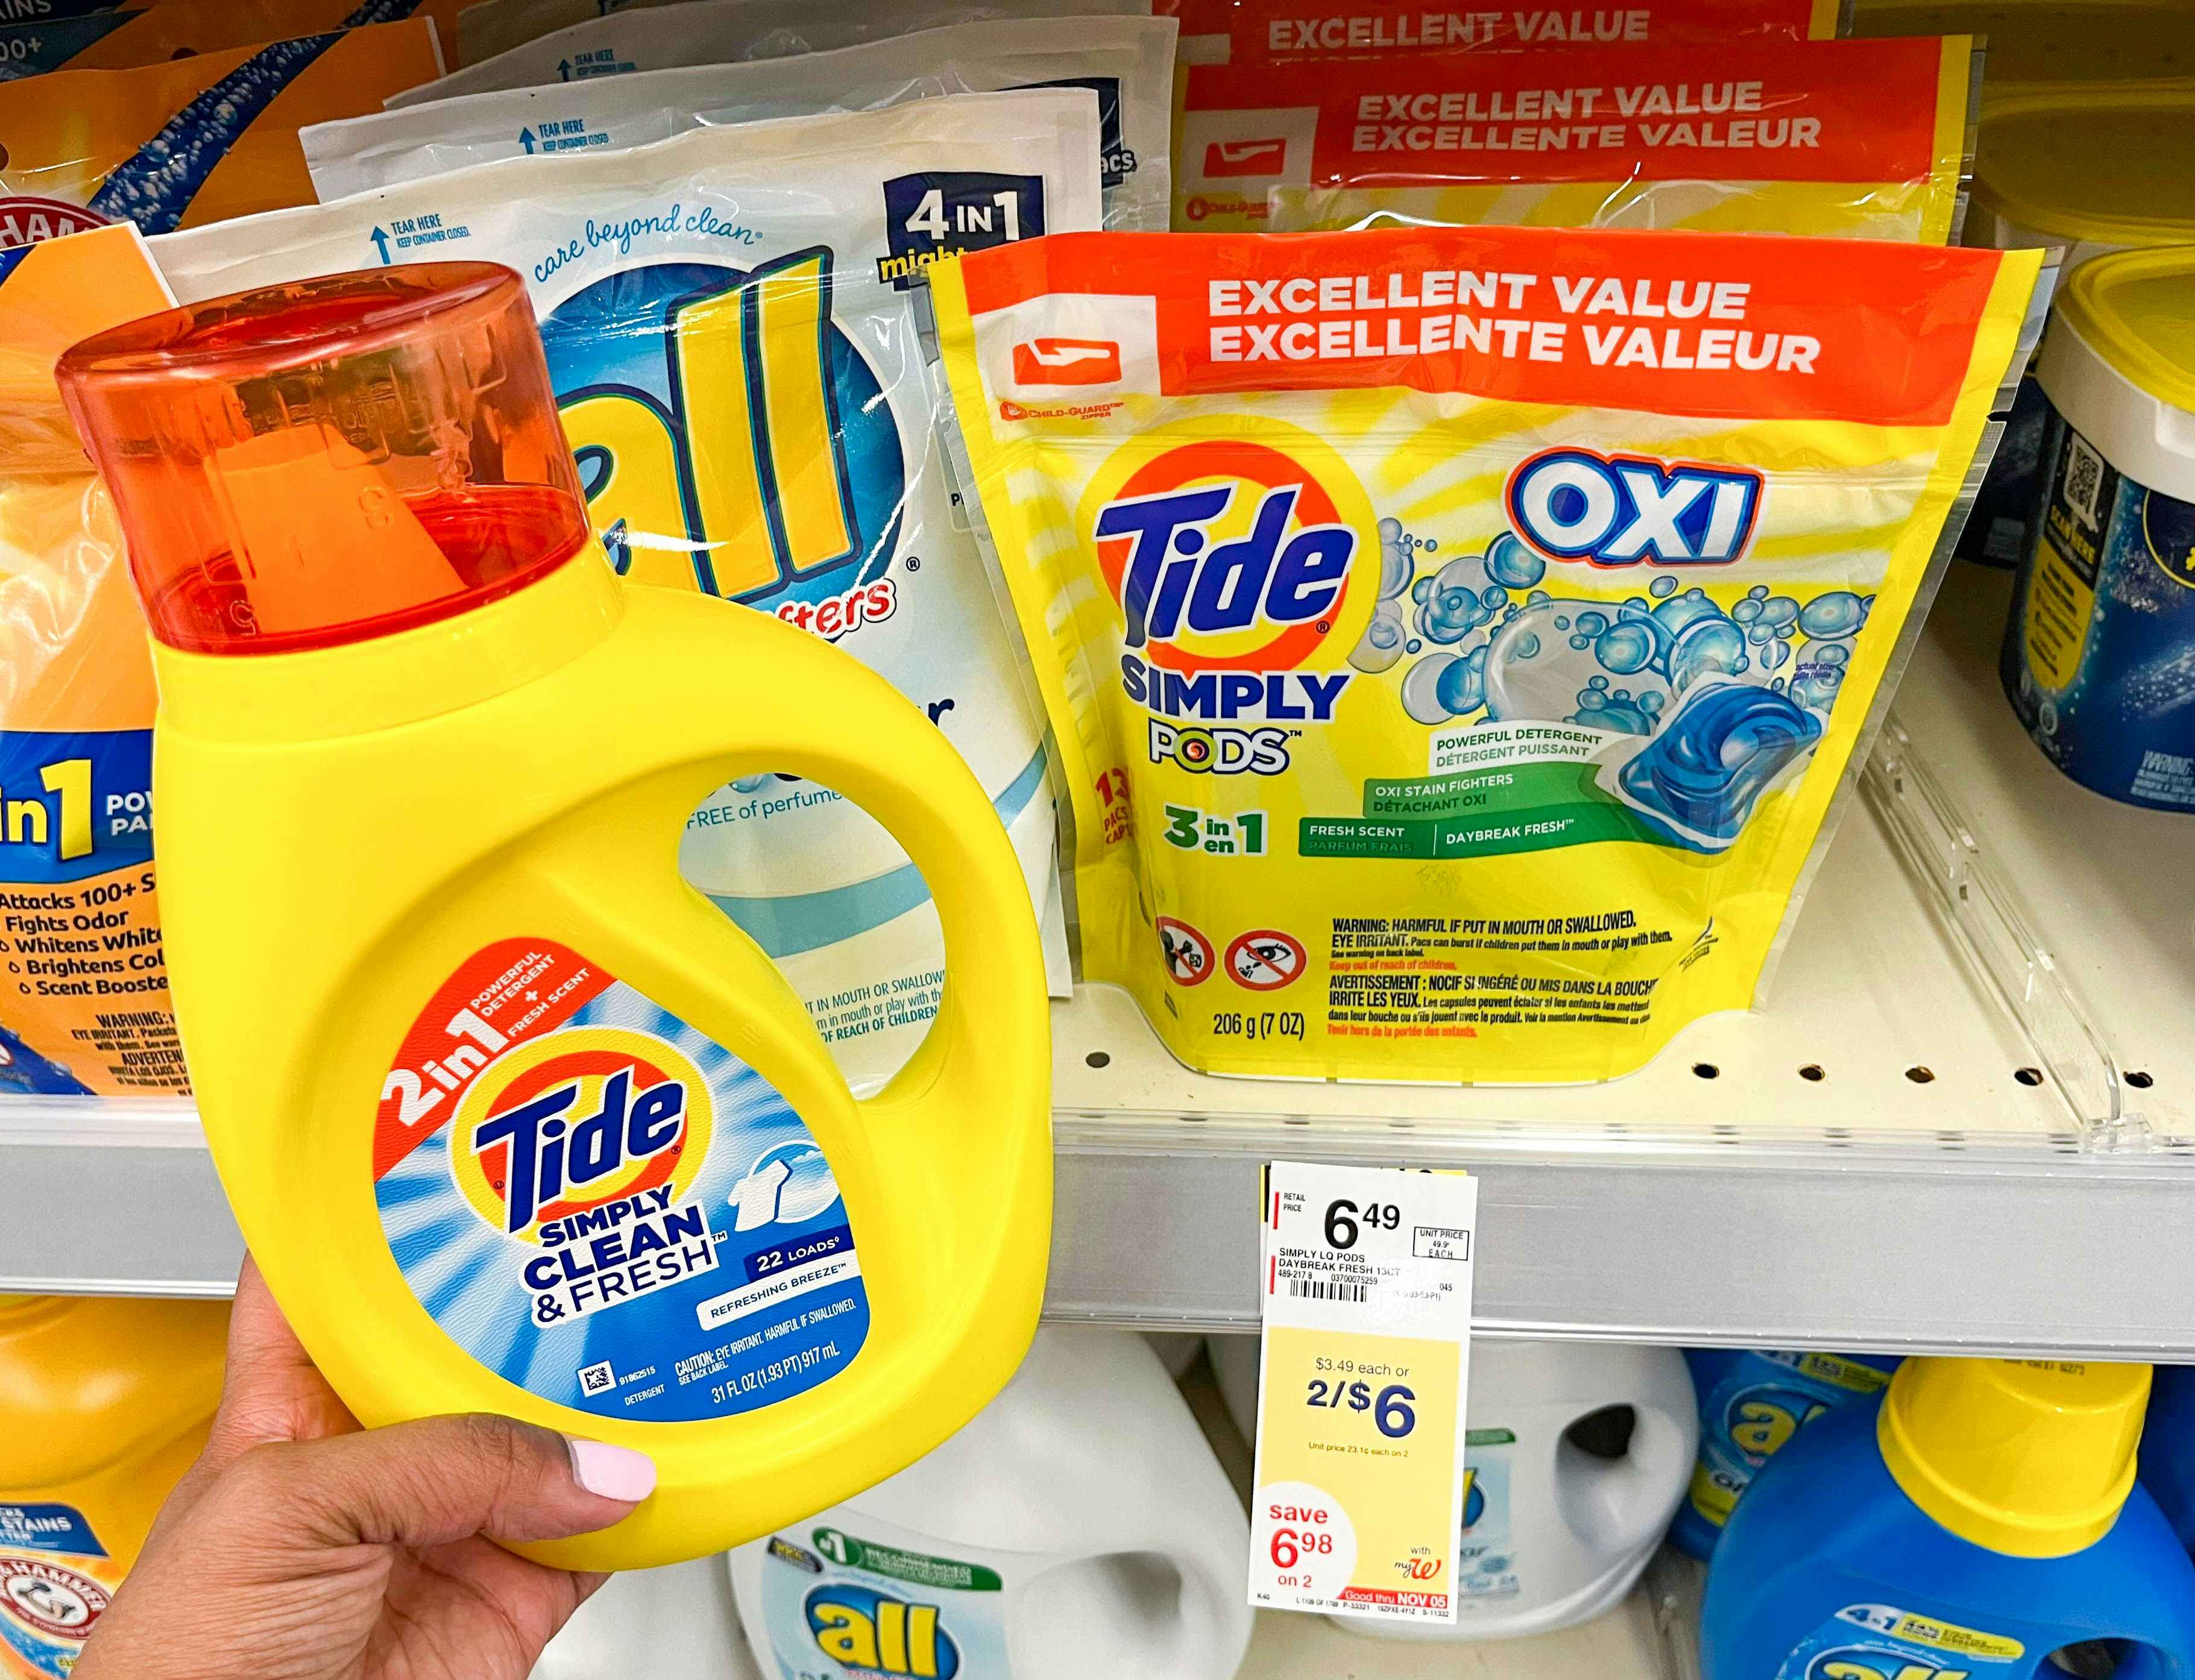 hand holding one bottle of Tide Simply liquid laundry detergent next to Tide Pods on shelf with sales tag underneath